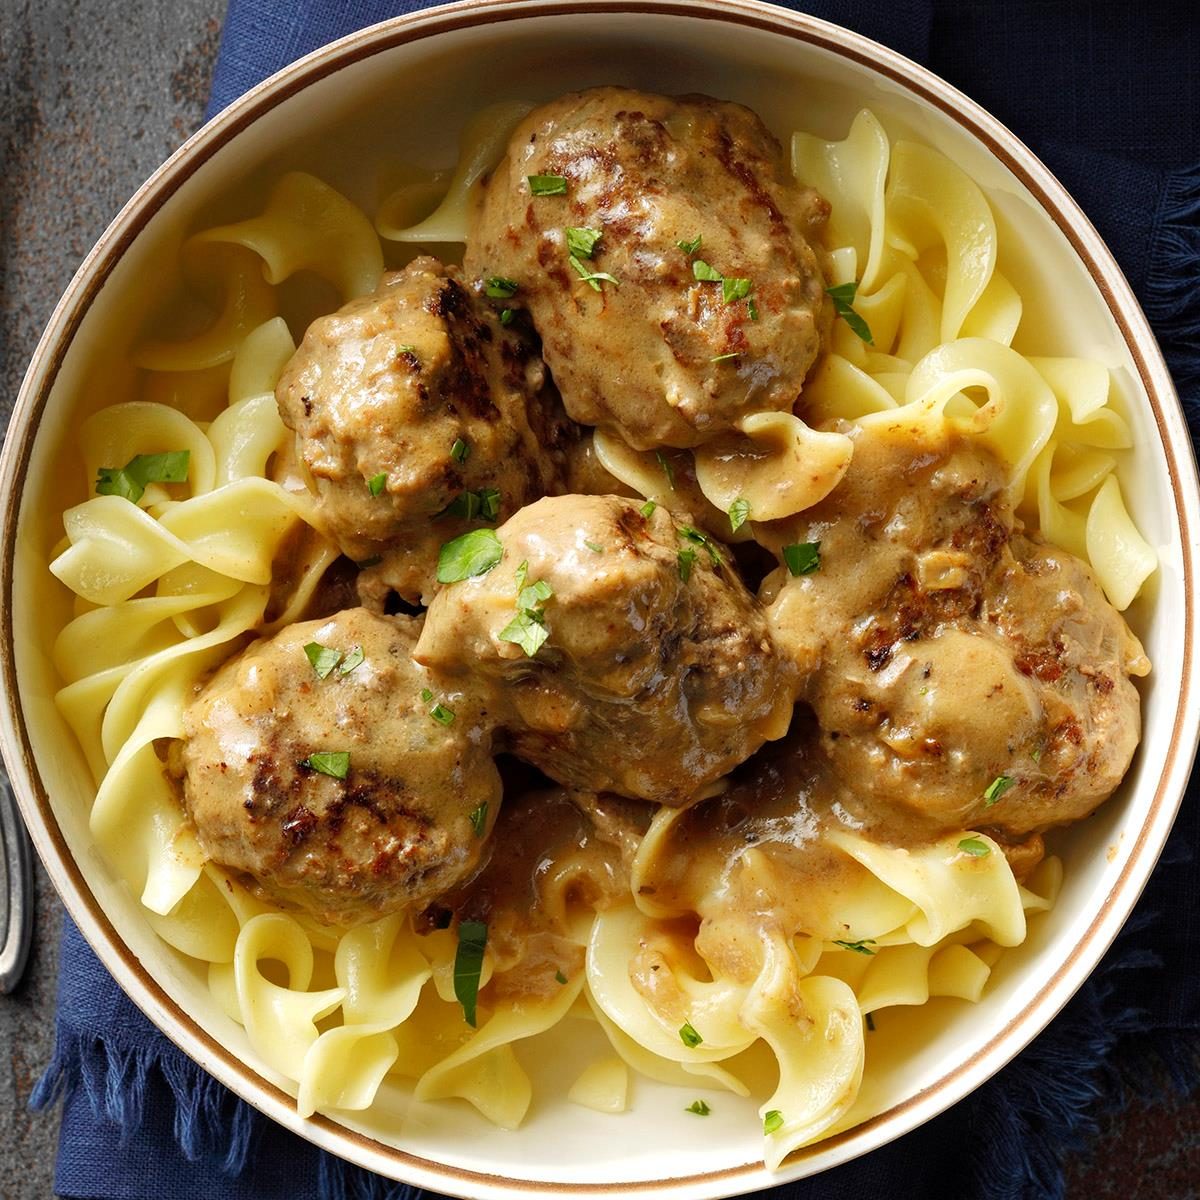 <p>I can still see Grandmother making dozens of these little meatballs, and gravy to go with them! The hint of spices gives them a savory taste that makes them authentically Norwegian. —Karen Hoylo, Duluth, Minnesota</p> <div class="listicle-page__buttons"> <div class="listicle-page__cta-button"><a href='https://www.tasteofhome.com/recipes/meatballs-and-gravy/'>Go to Recipe</a></div> </div>